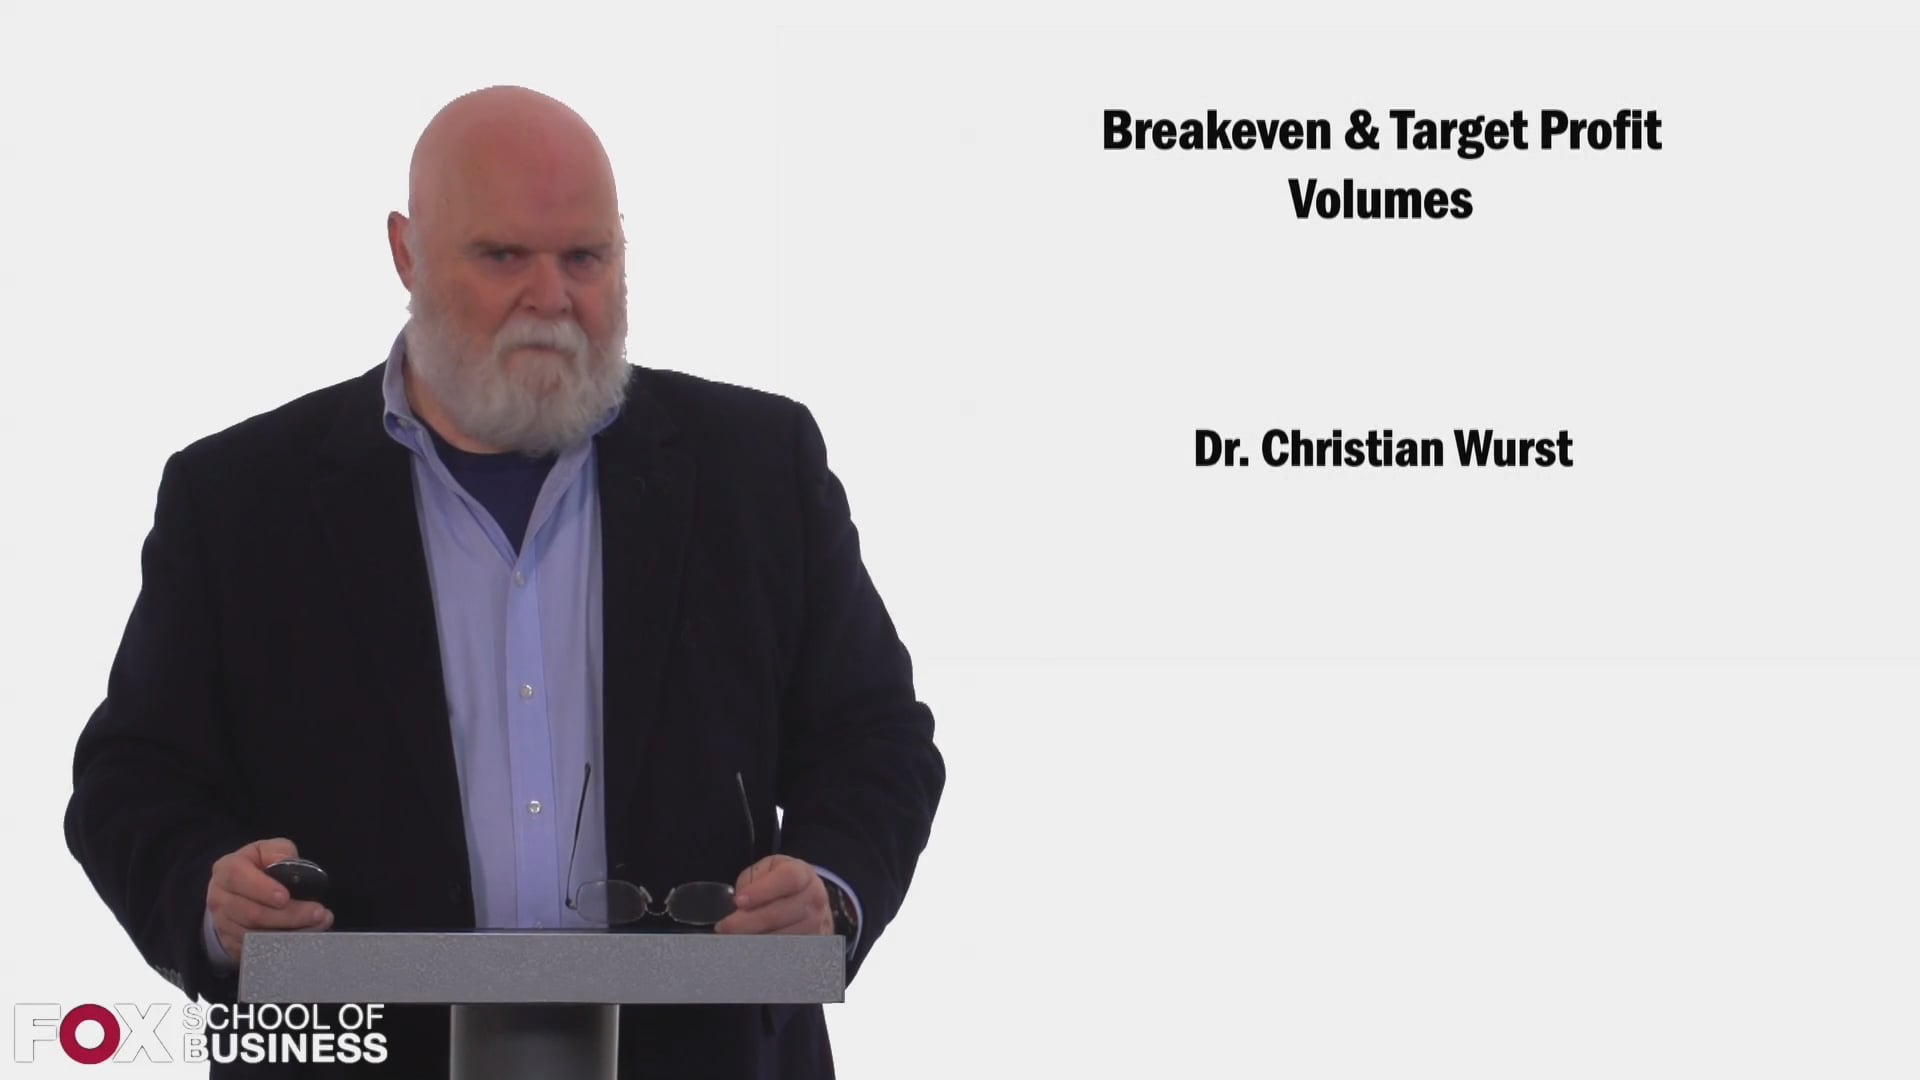 Breakeven and Target Profit Volumes